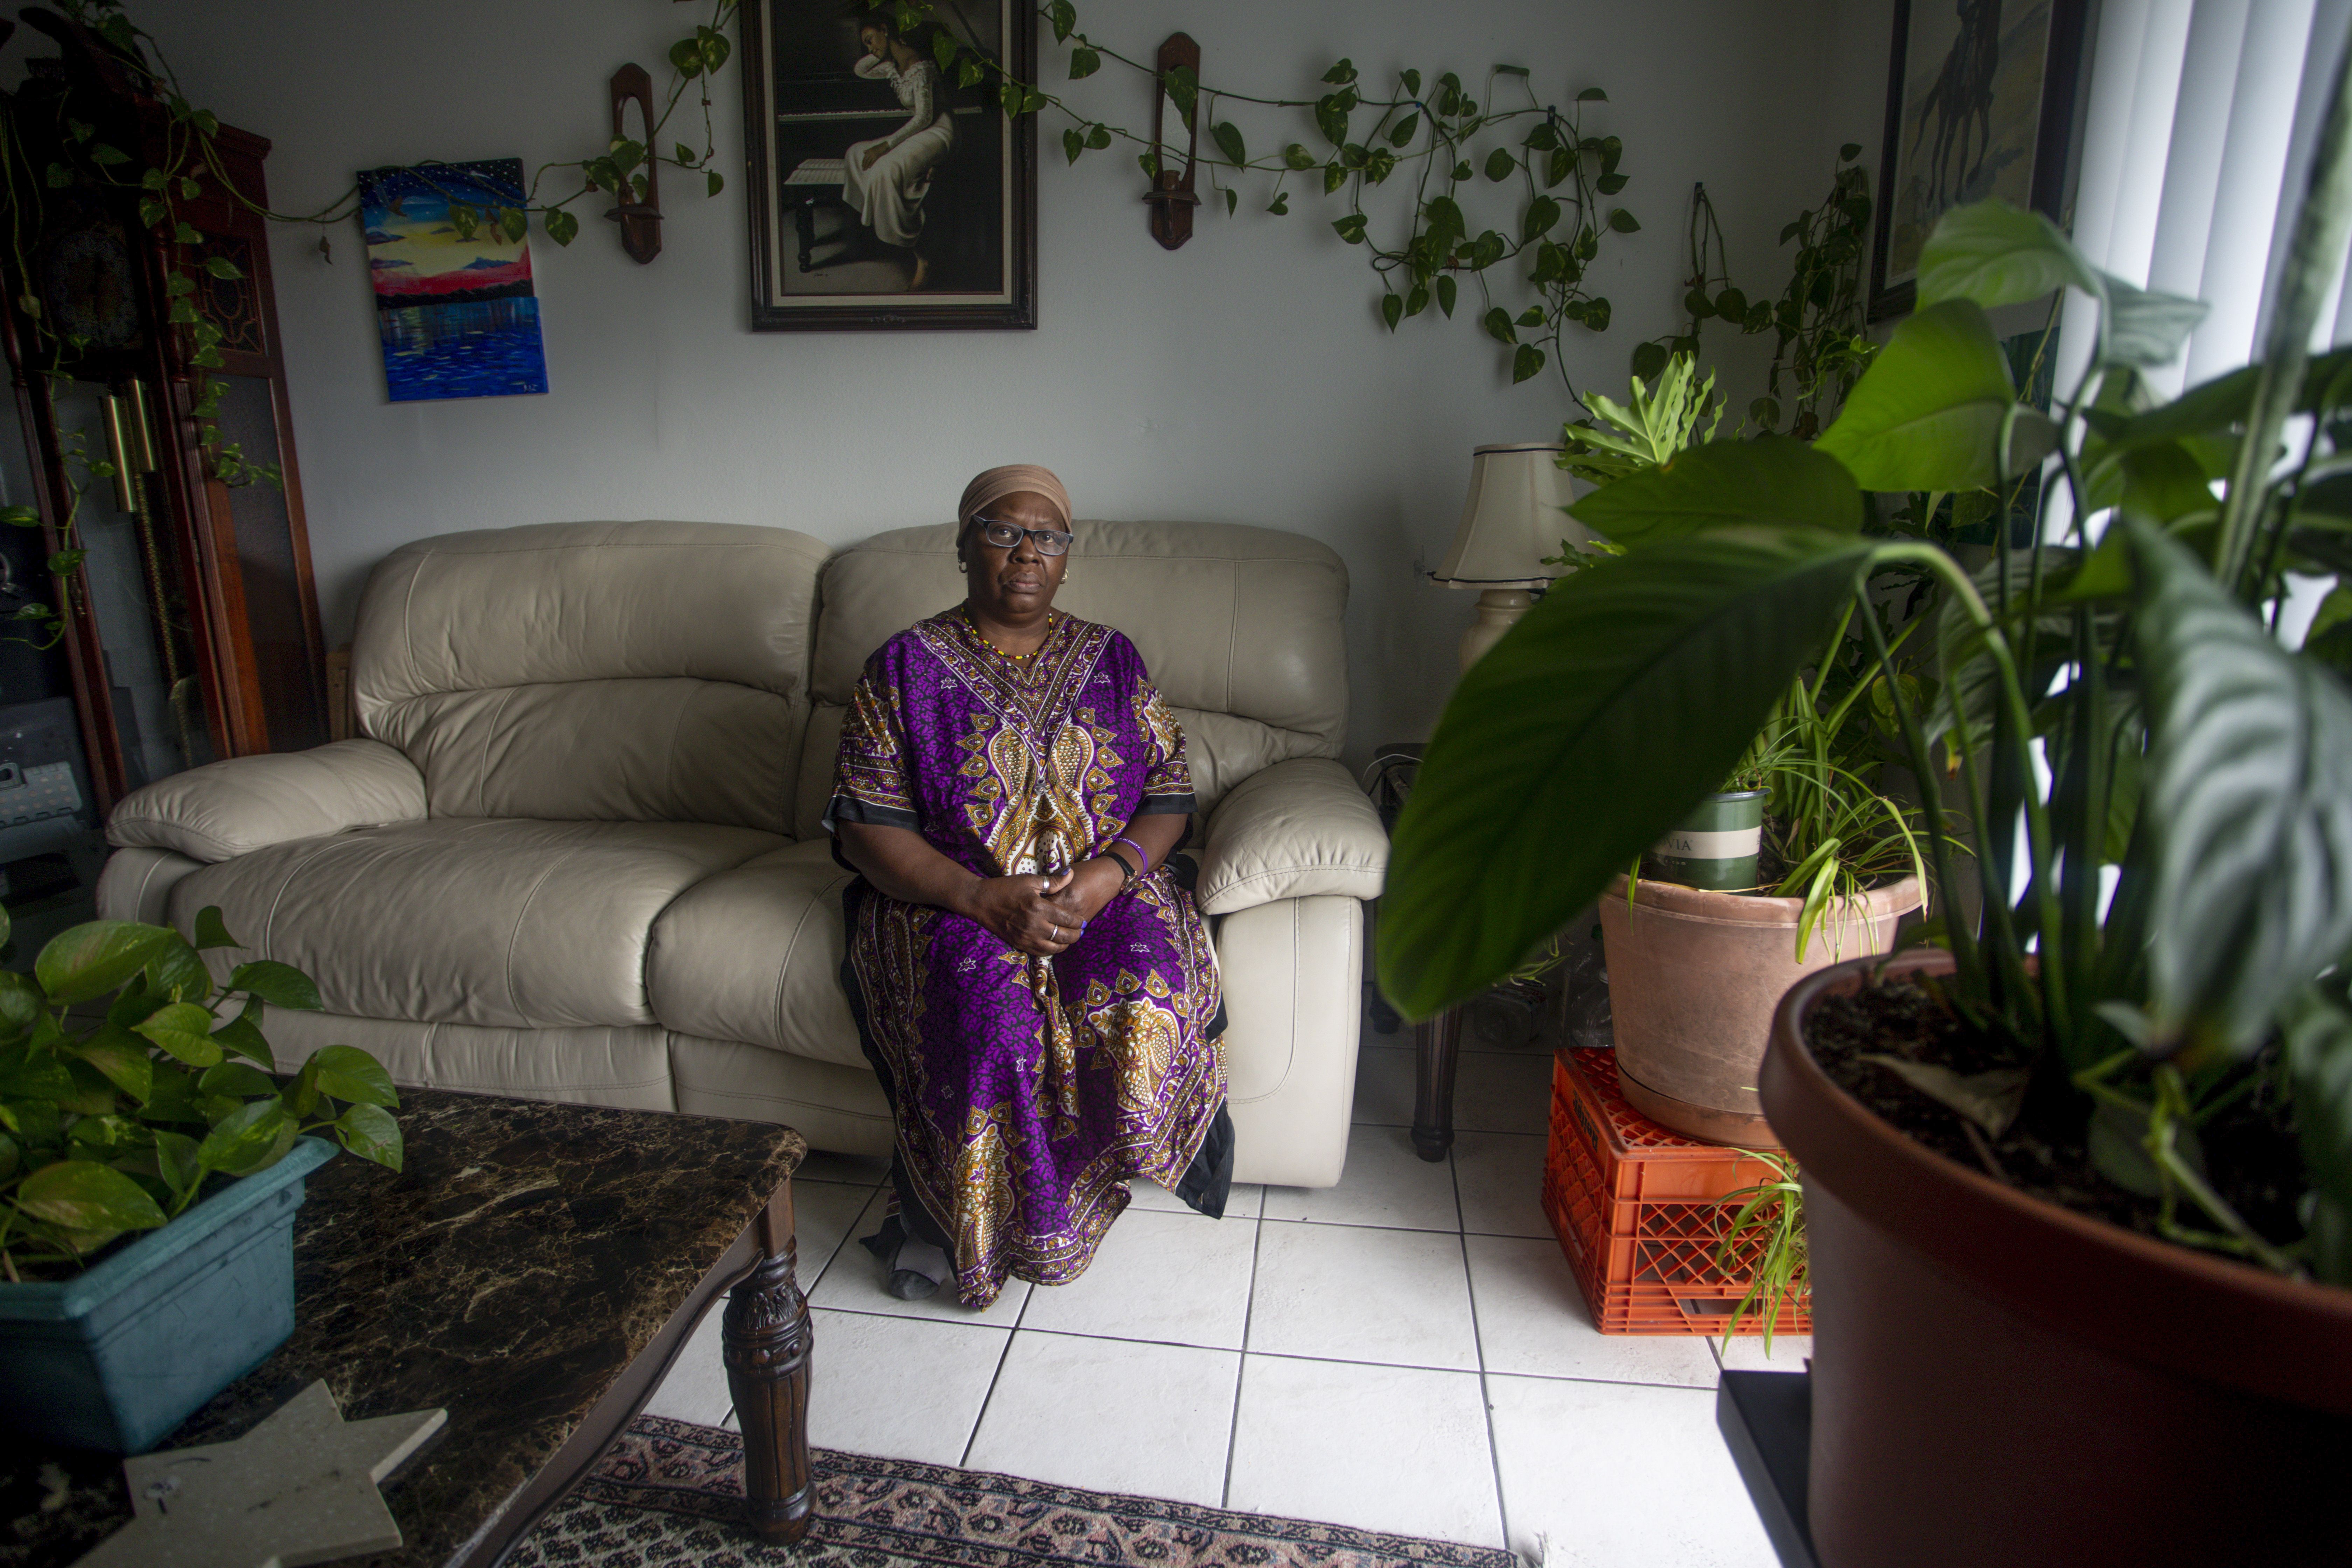 Yochebed Israel, 59, poses for a portrait inside her Tampa, Florida, apartment on Monday, Aug. 17, 2020. Israel, a nursing assistant, found an eviction notice on her door in May after being unable to pay rent since she contracted COVID-19 from her daughter in April, and could not return to work. “There’s a lot of despair in this situation,” Israel said. “Not only are you sick from COVID-19, you miss work, you miss your job, you miss getting paid, you miss a lot of things that dominoes into this situation.” Image by Ivy Ceballo. United States, 2020.